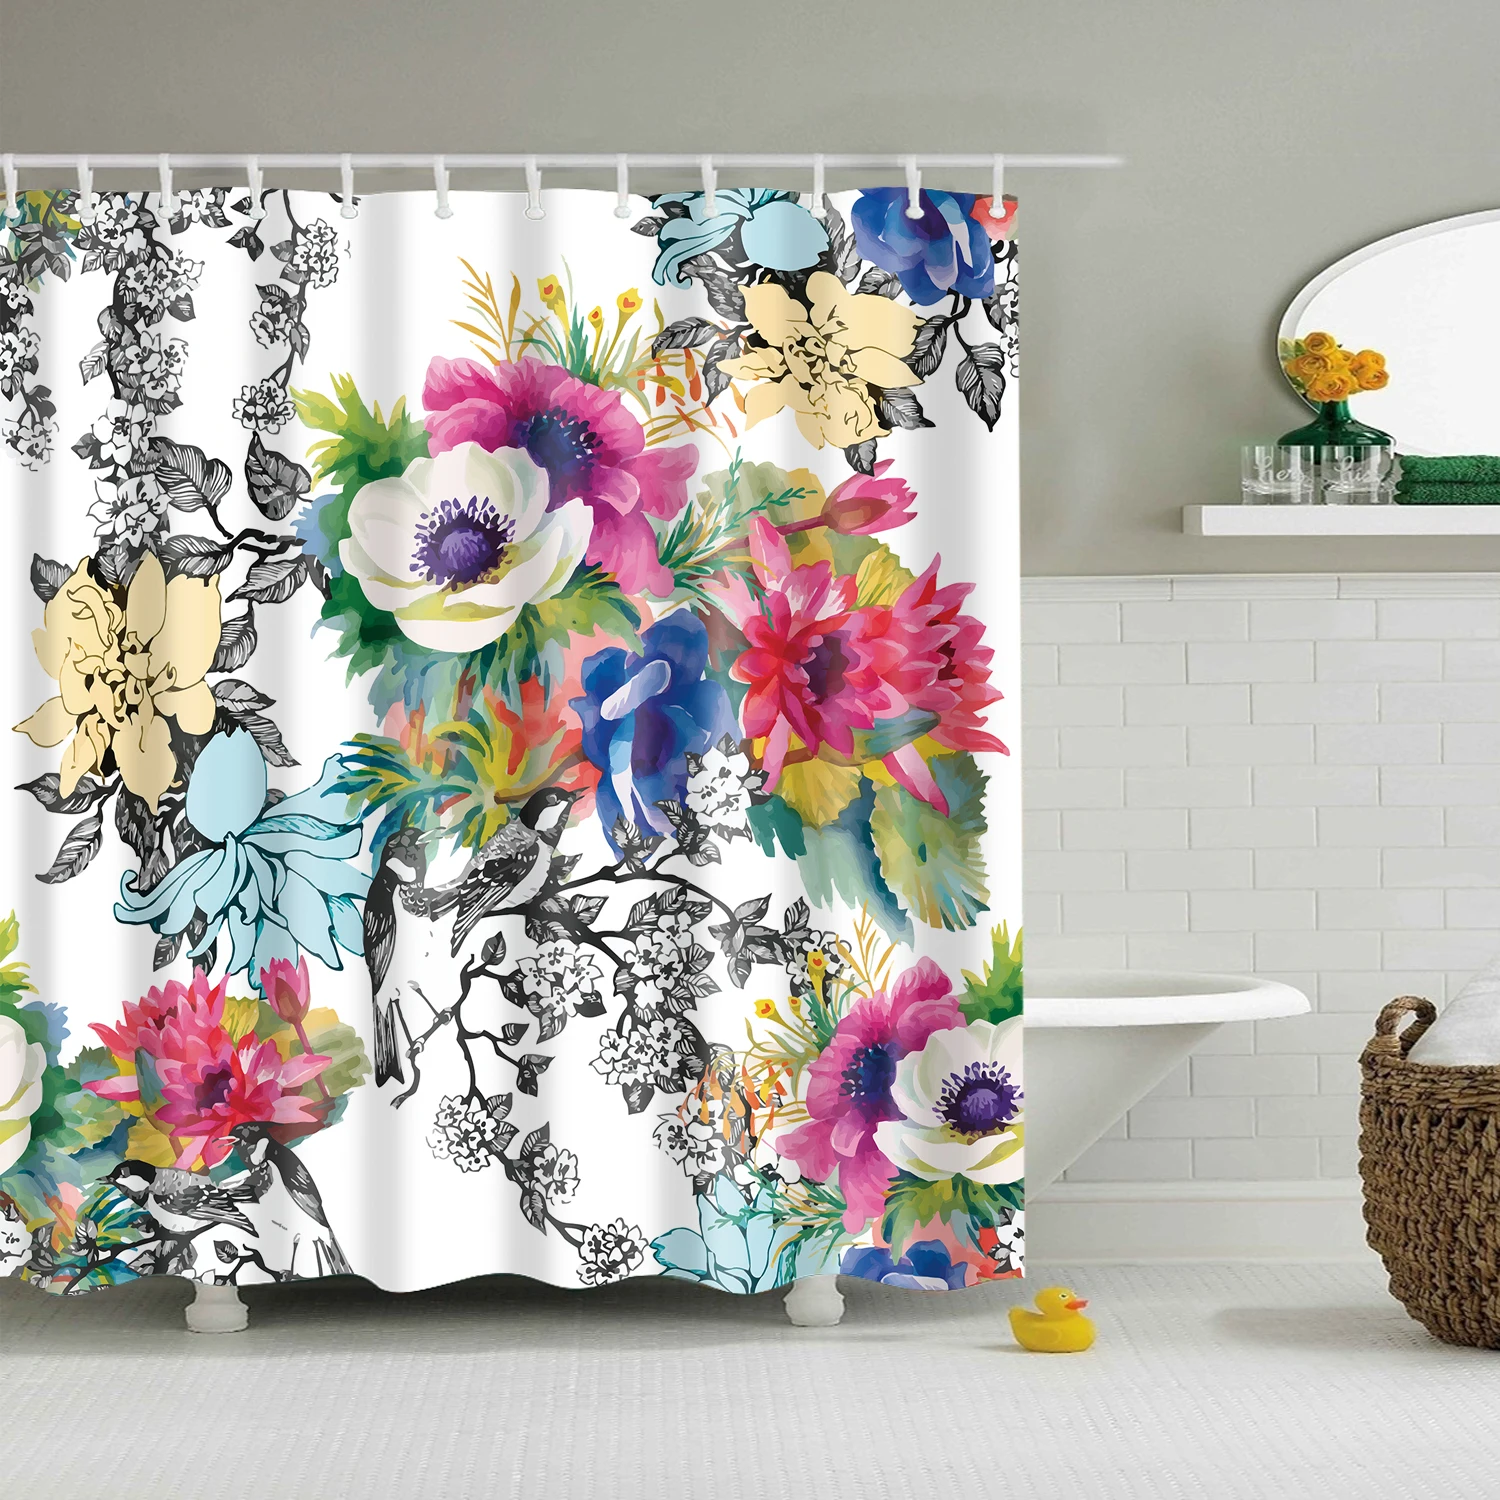 

Flower Shower Curtain Vivid Colorful Garden Print Blossoming Wildflowers Birds Leaves Branches Cloth Fabric Bathroom Decor Set